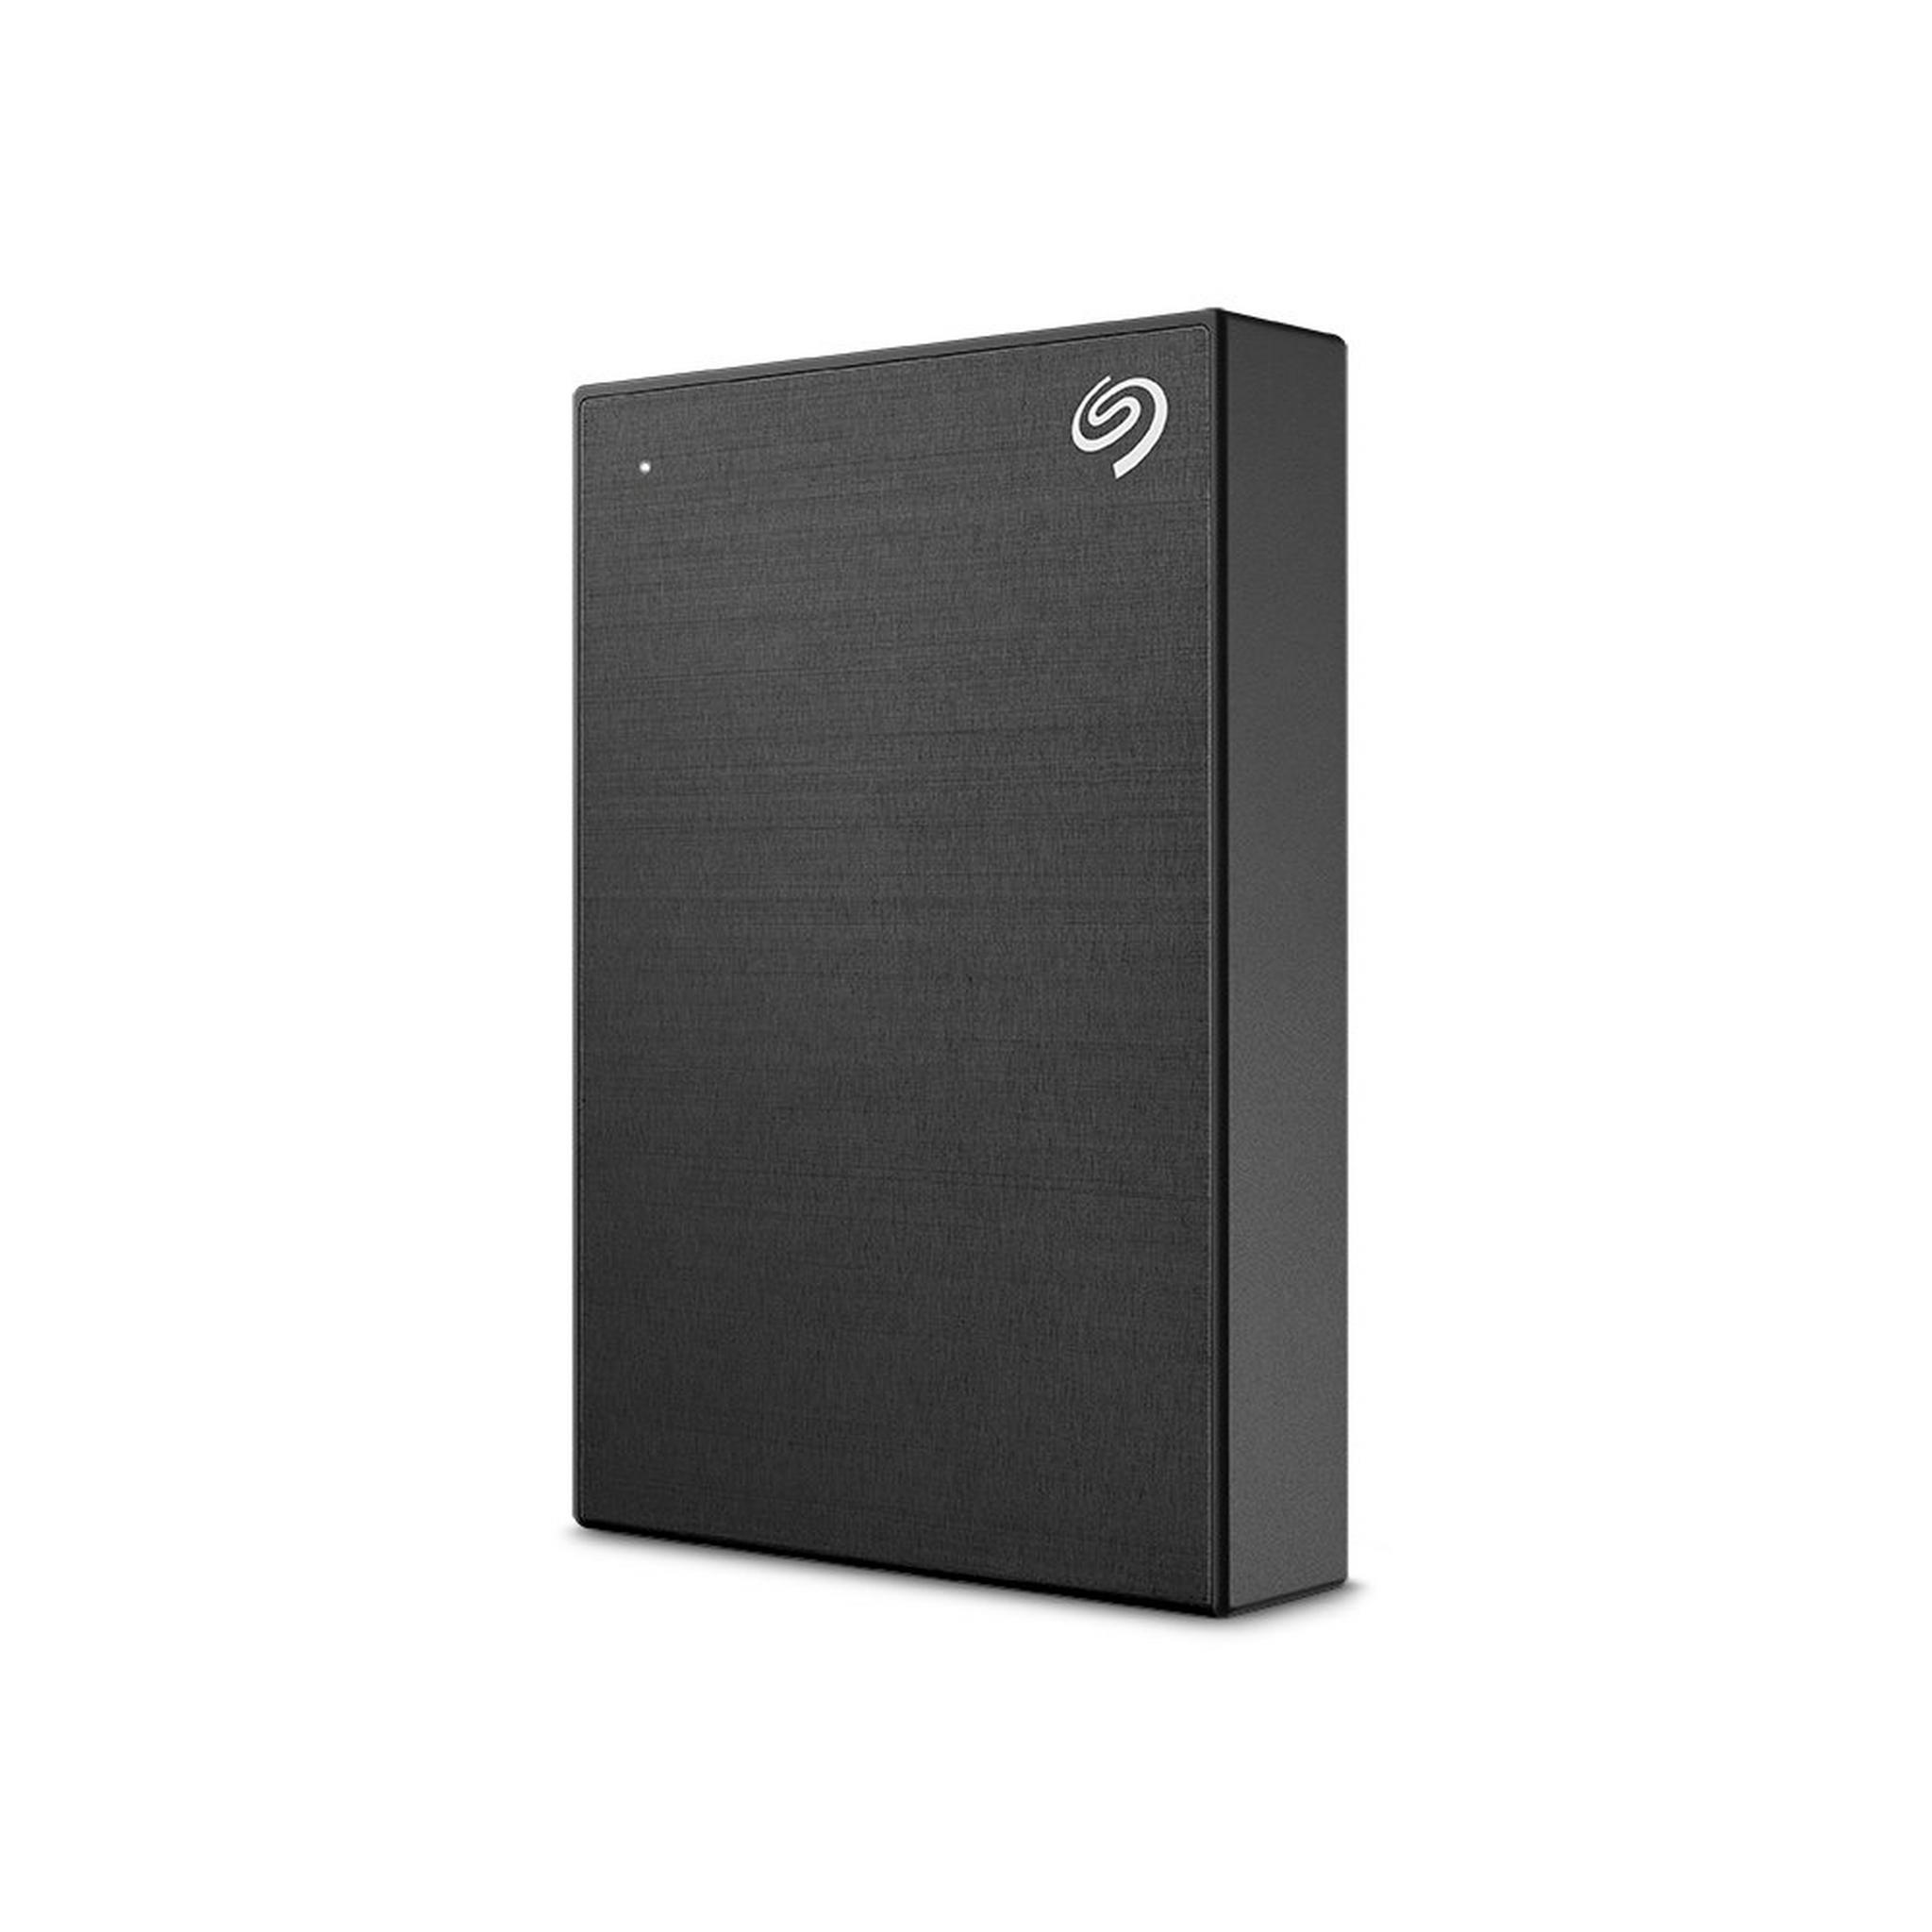 SEAGATE One Touch Portable Hard drive, 1TB HDD with Password, STKY1000400 - Black